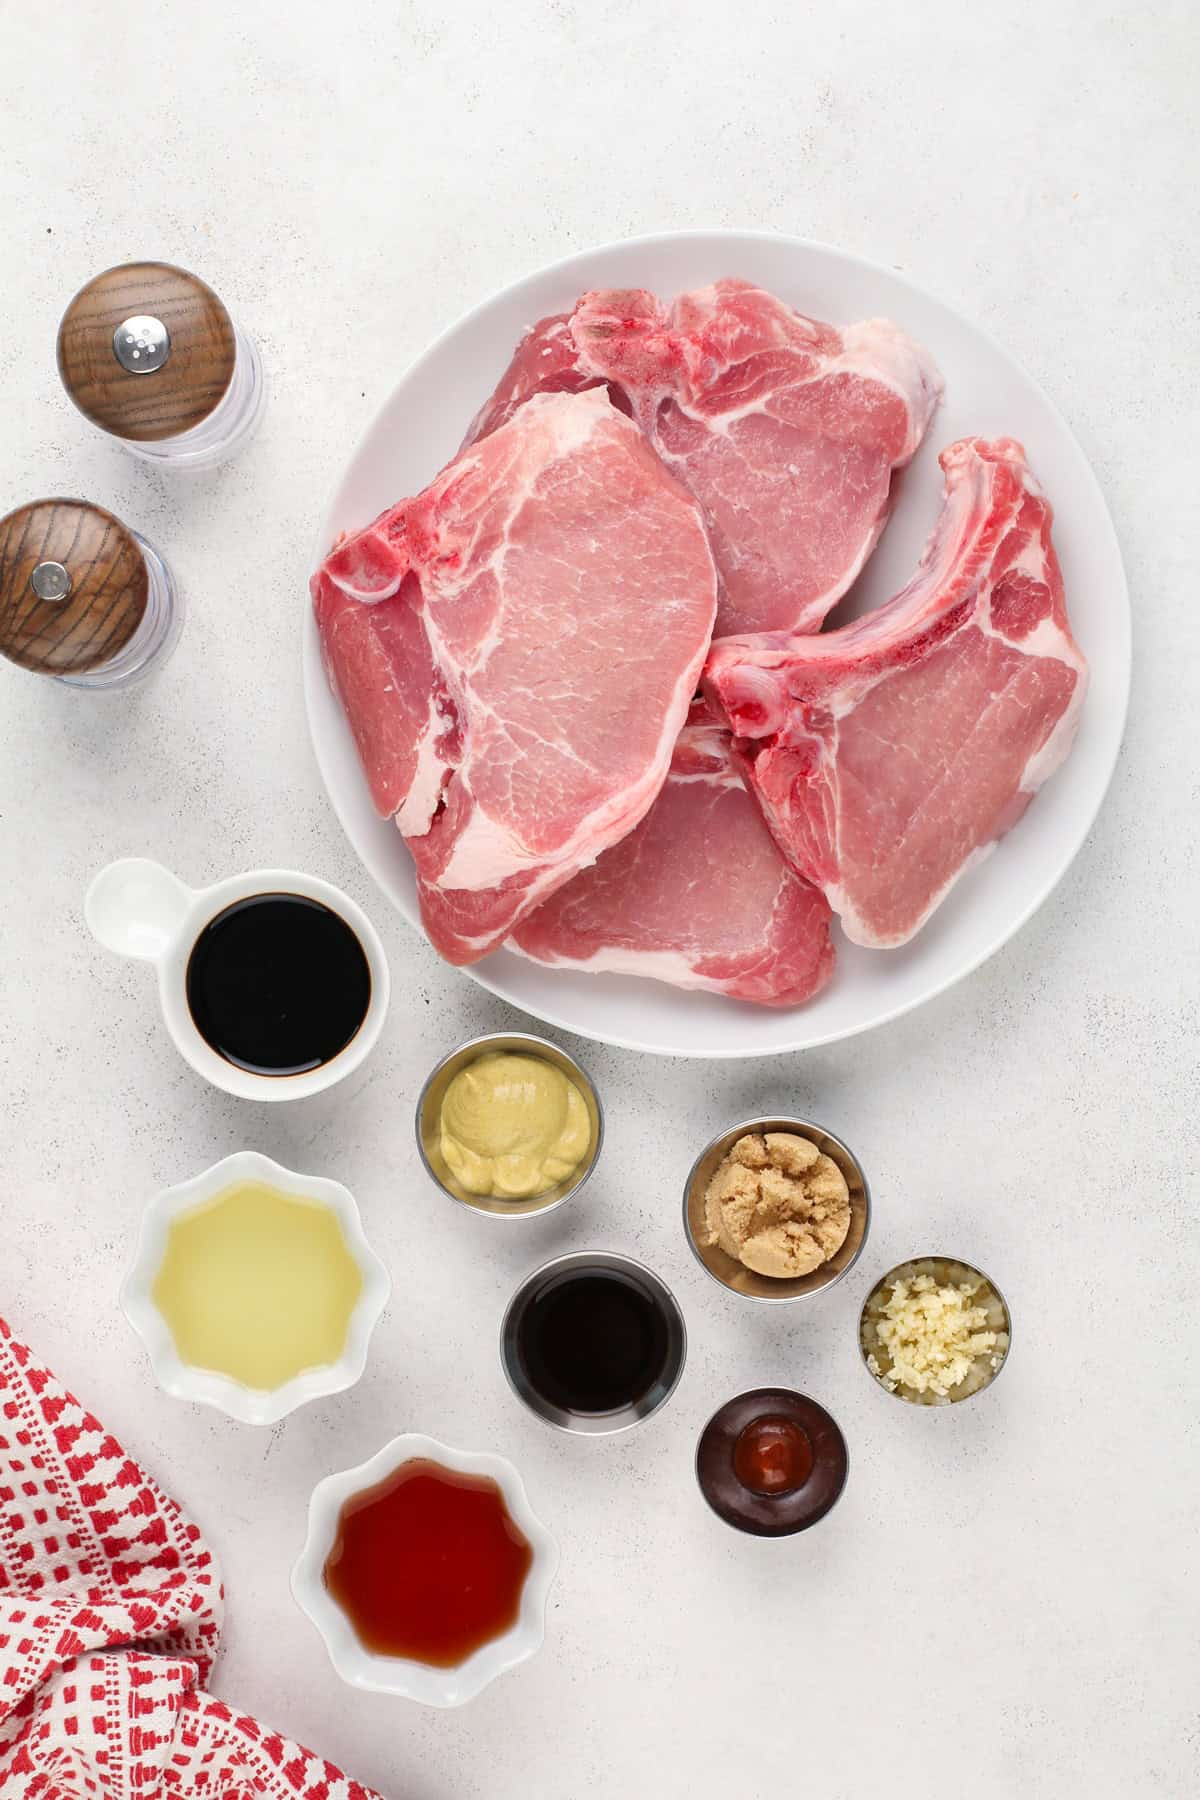 Ingredients for grilled pork chops arranged on a countertop.